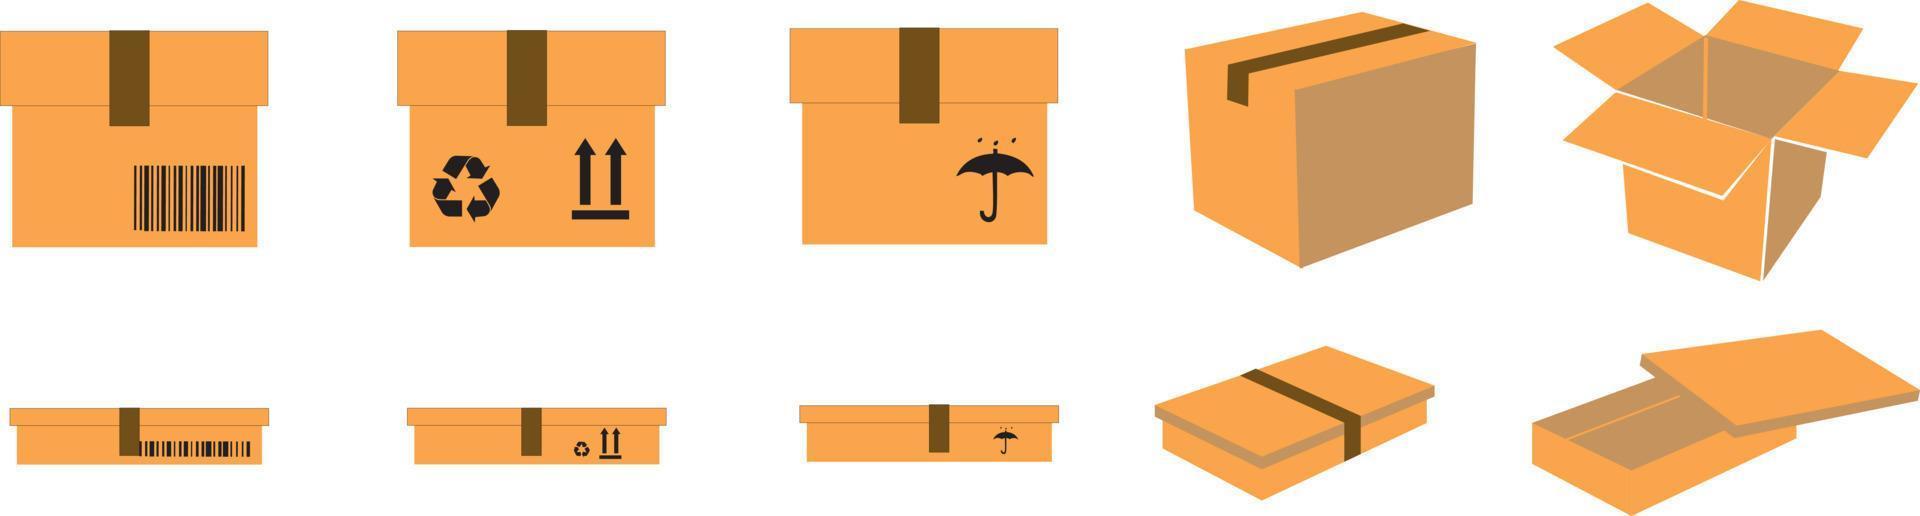 Set Different Types Big, Small, Round or Square for Web and App. Vector illustration of Box